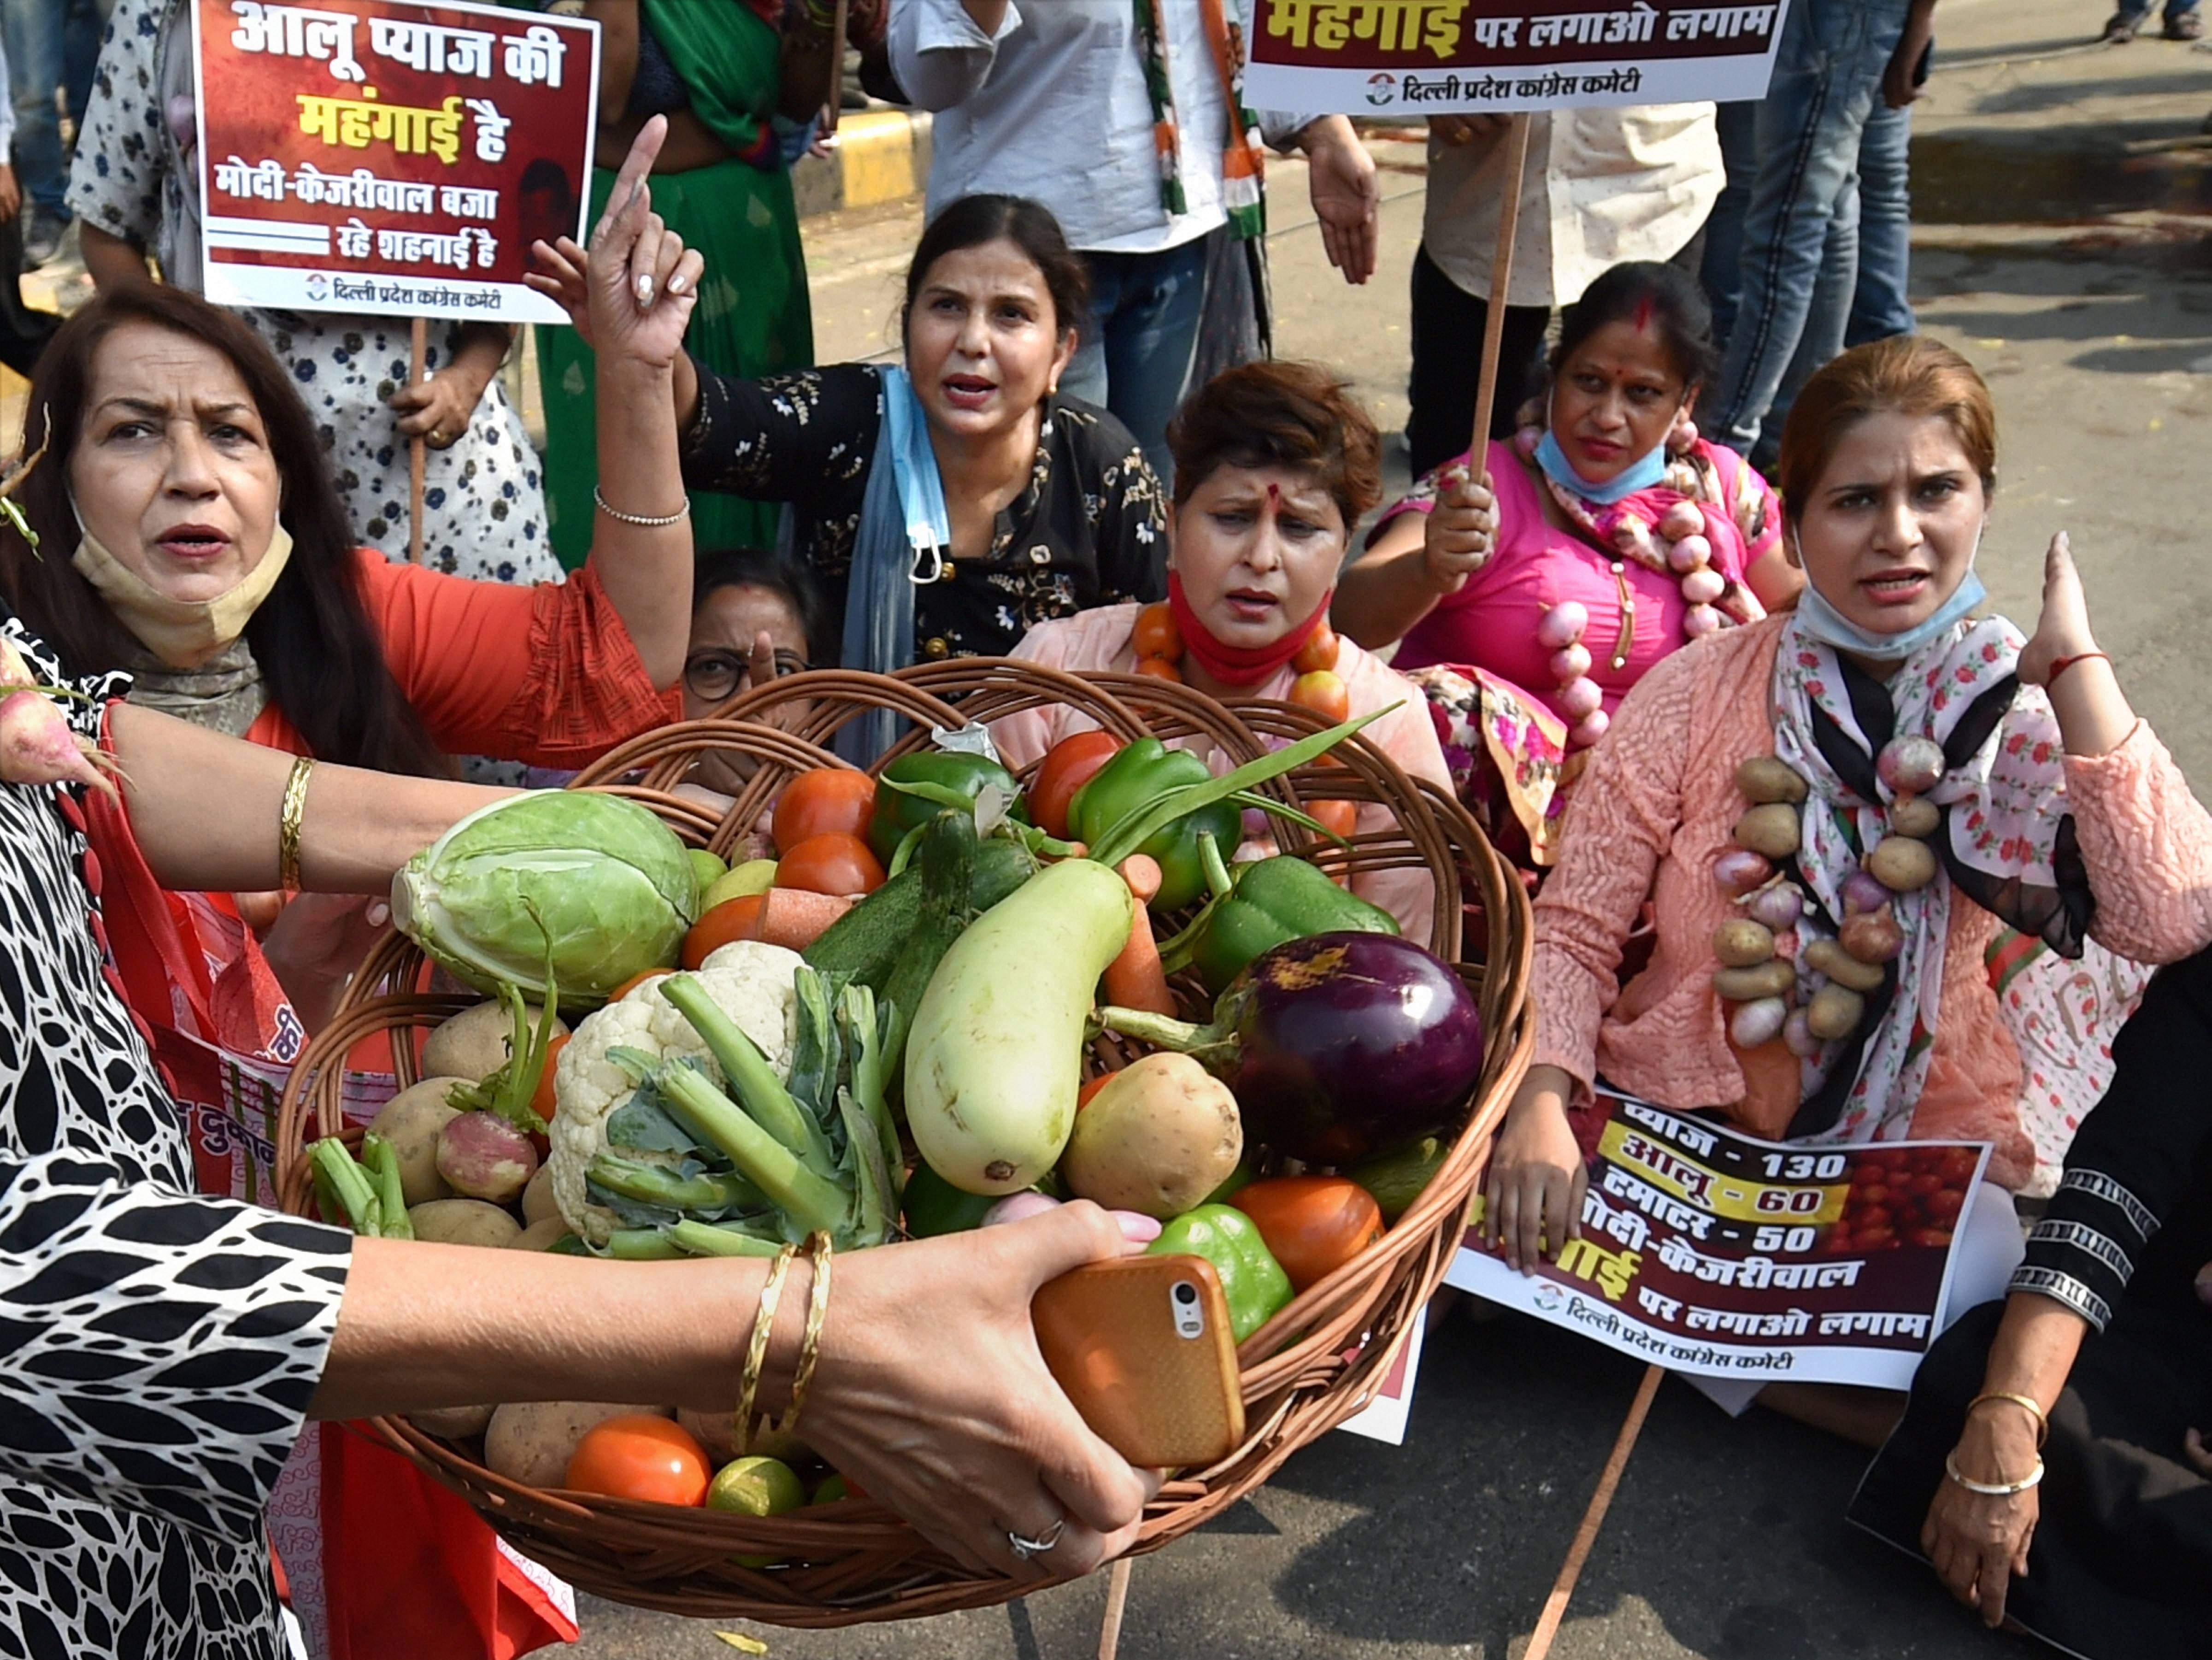 Members of Delhi Pradesh Congress Committee stage a protest against the BJP and AAP governments over their alleged failure in controlling the soaring prices of onion. Credits: PTI Photo